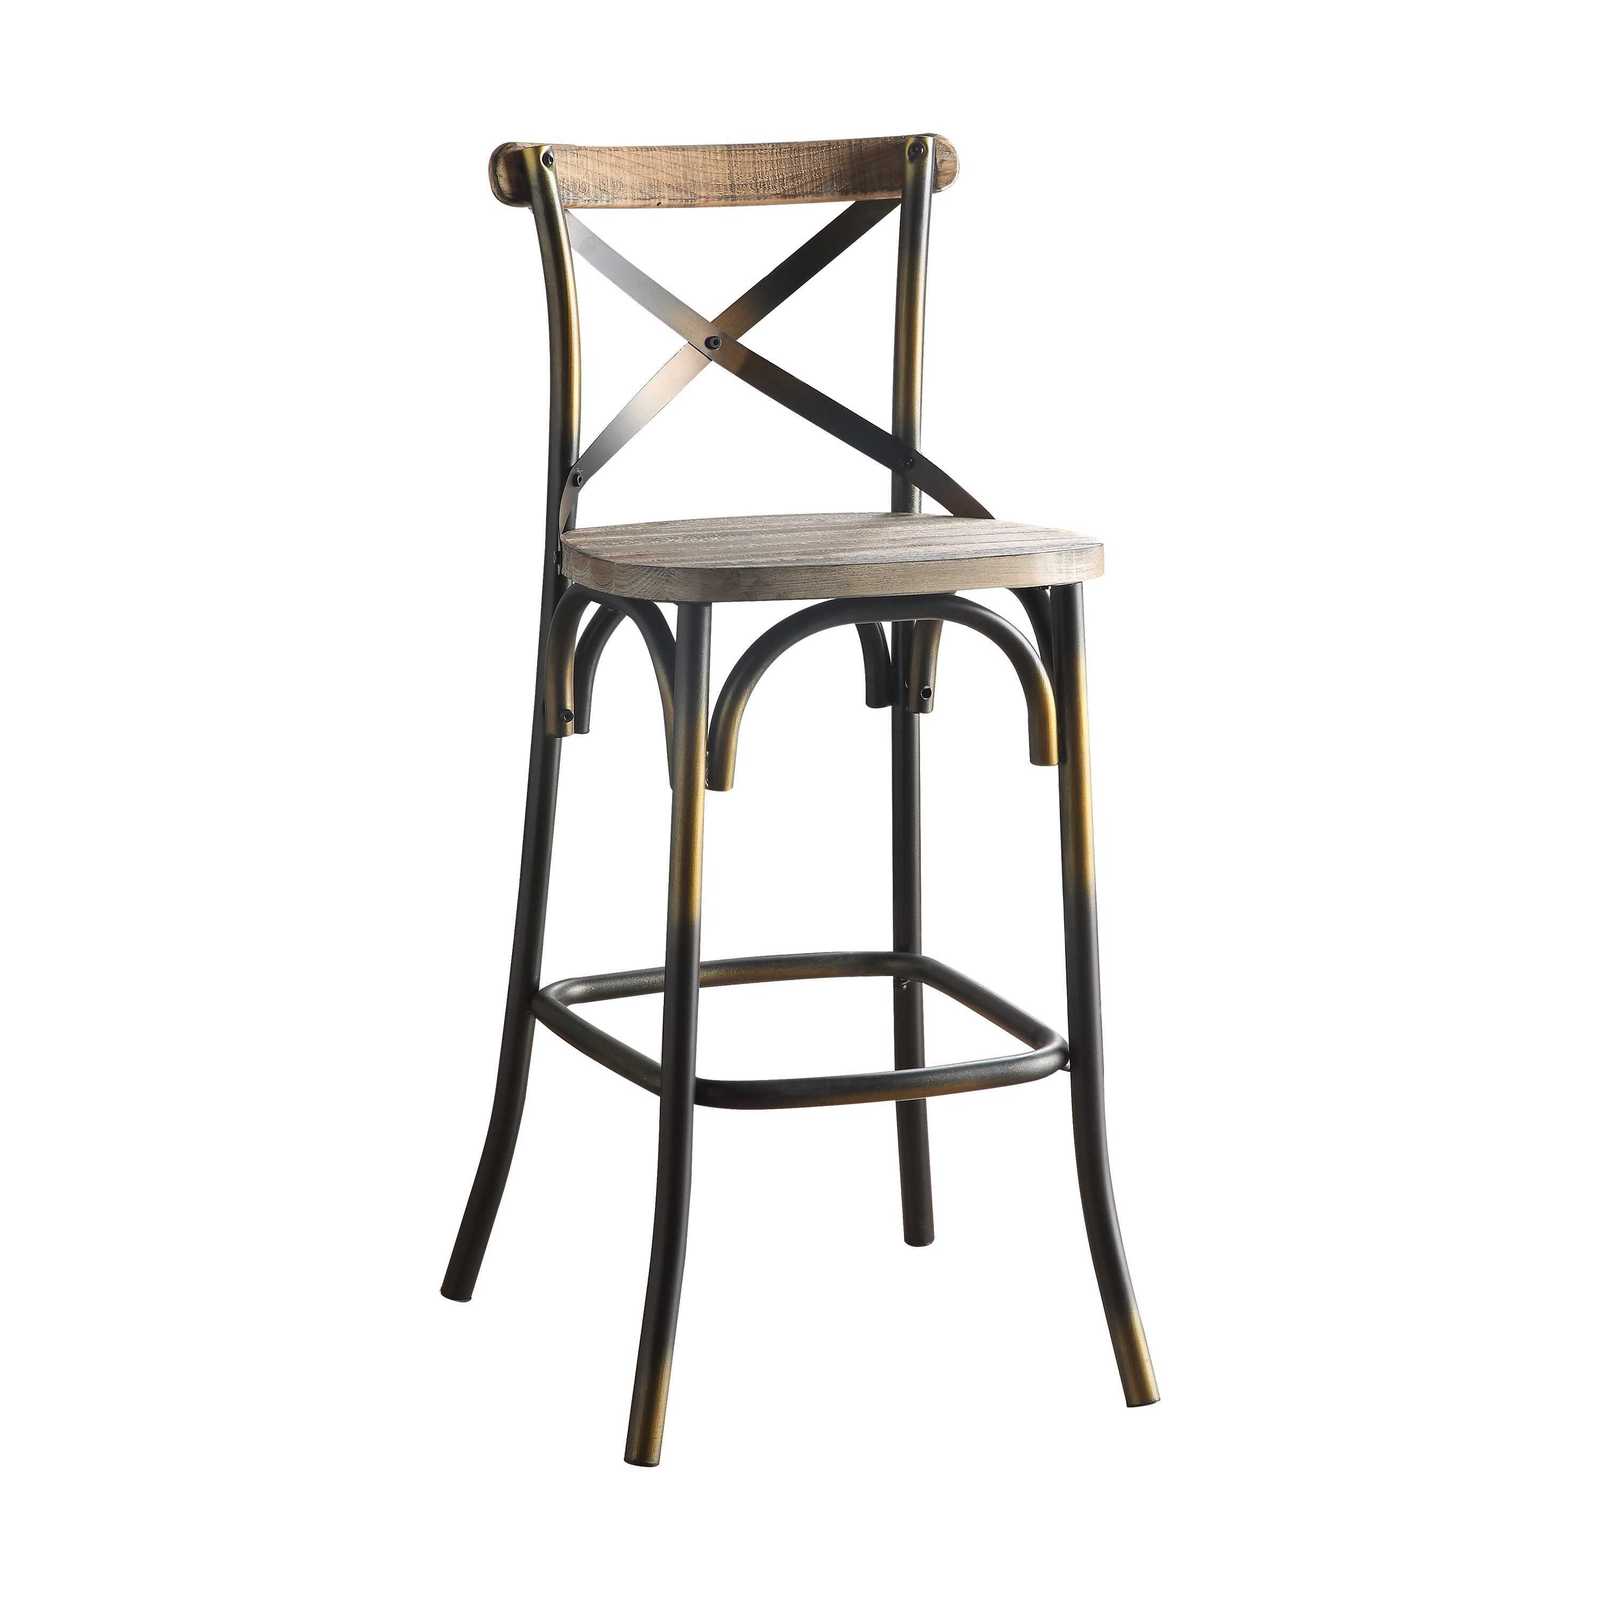 43 High Back Antiqued Copper and Oak Finish Bar Chair